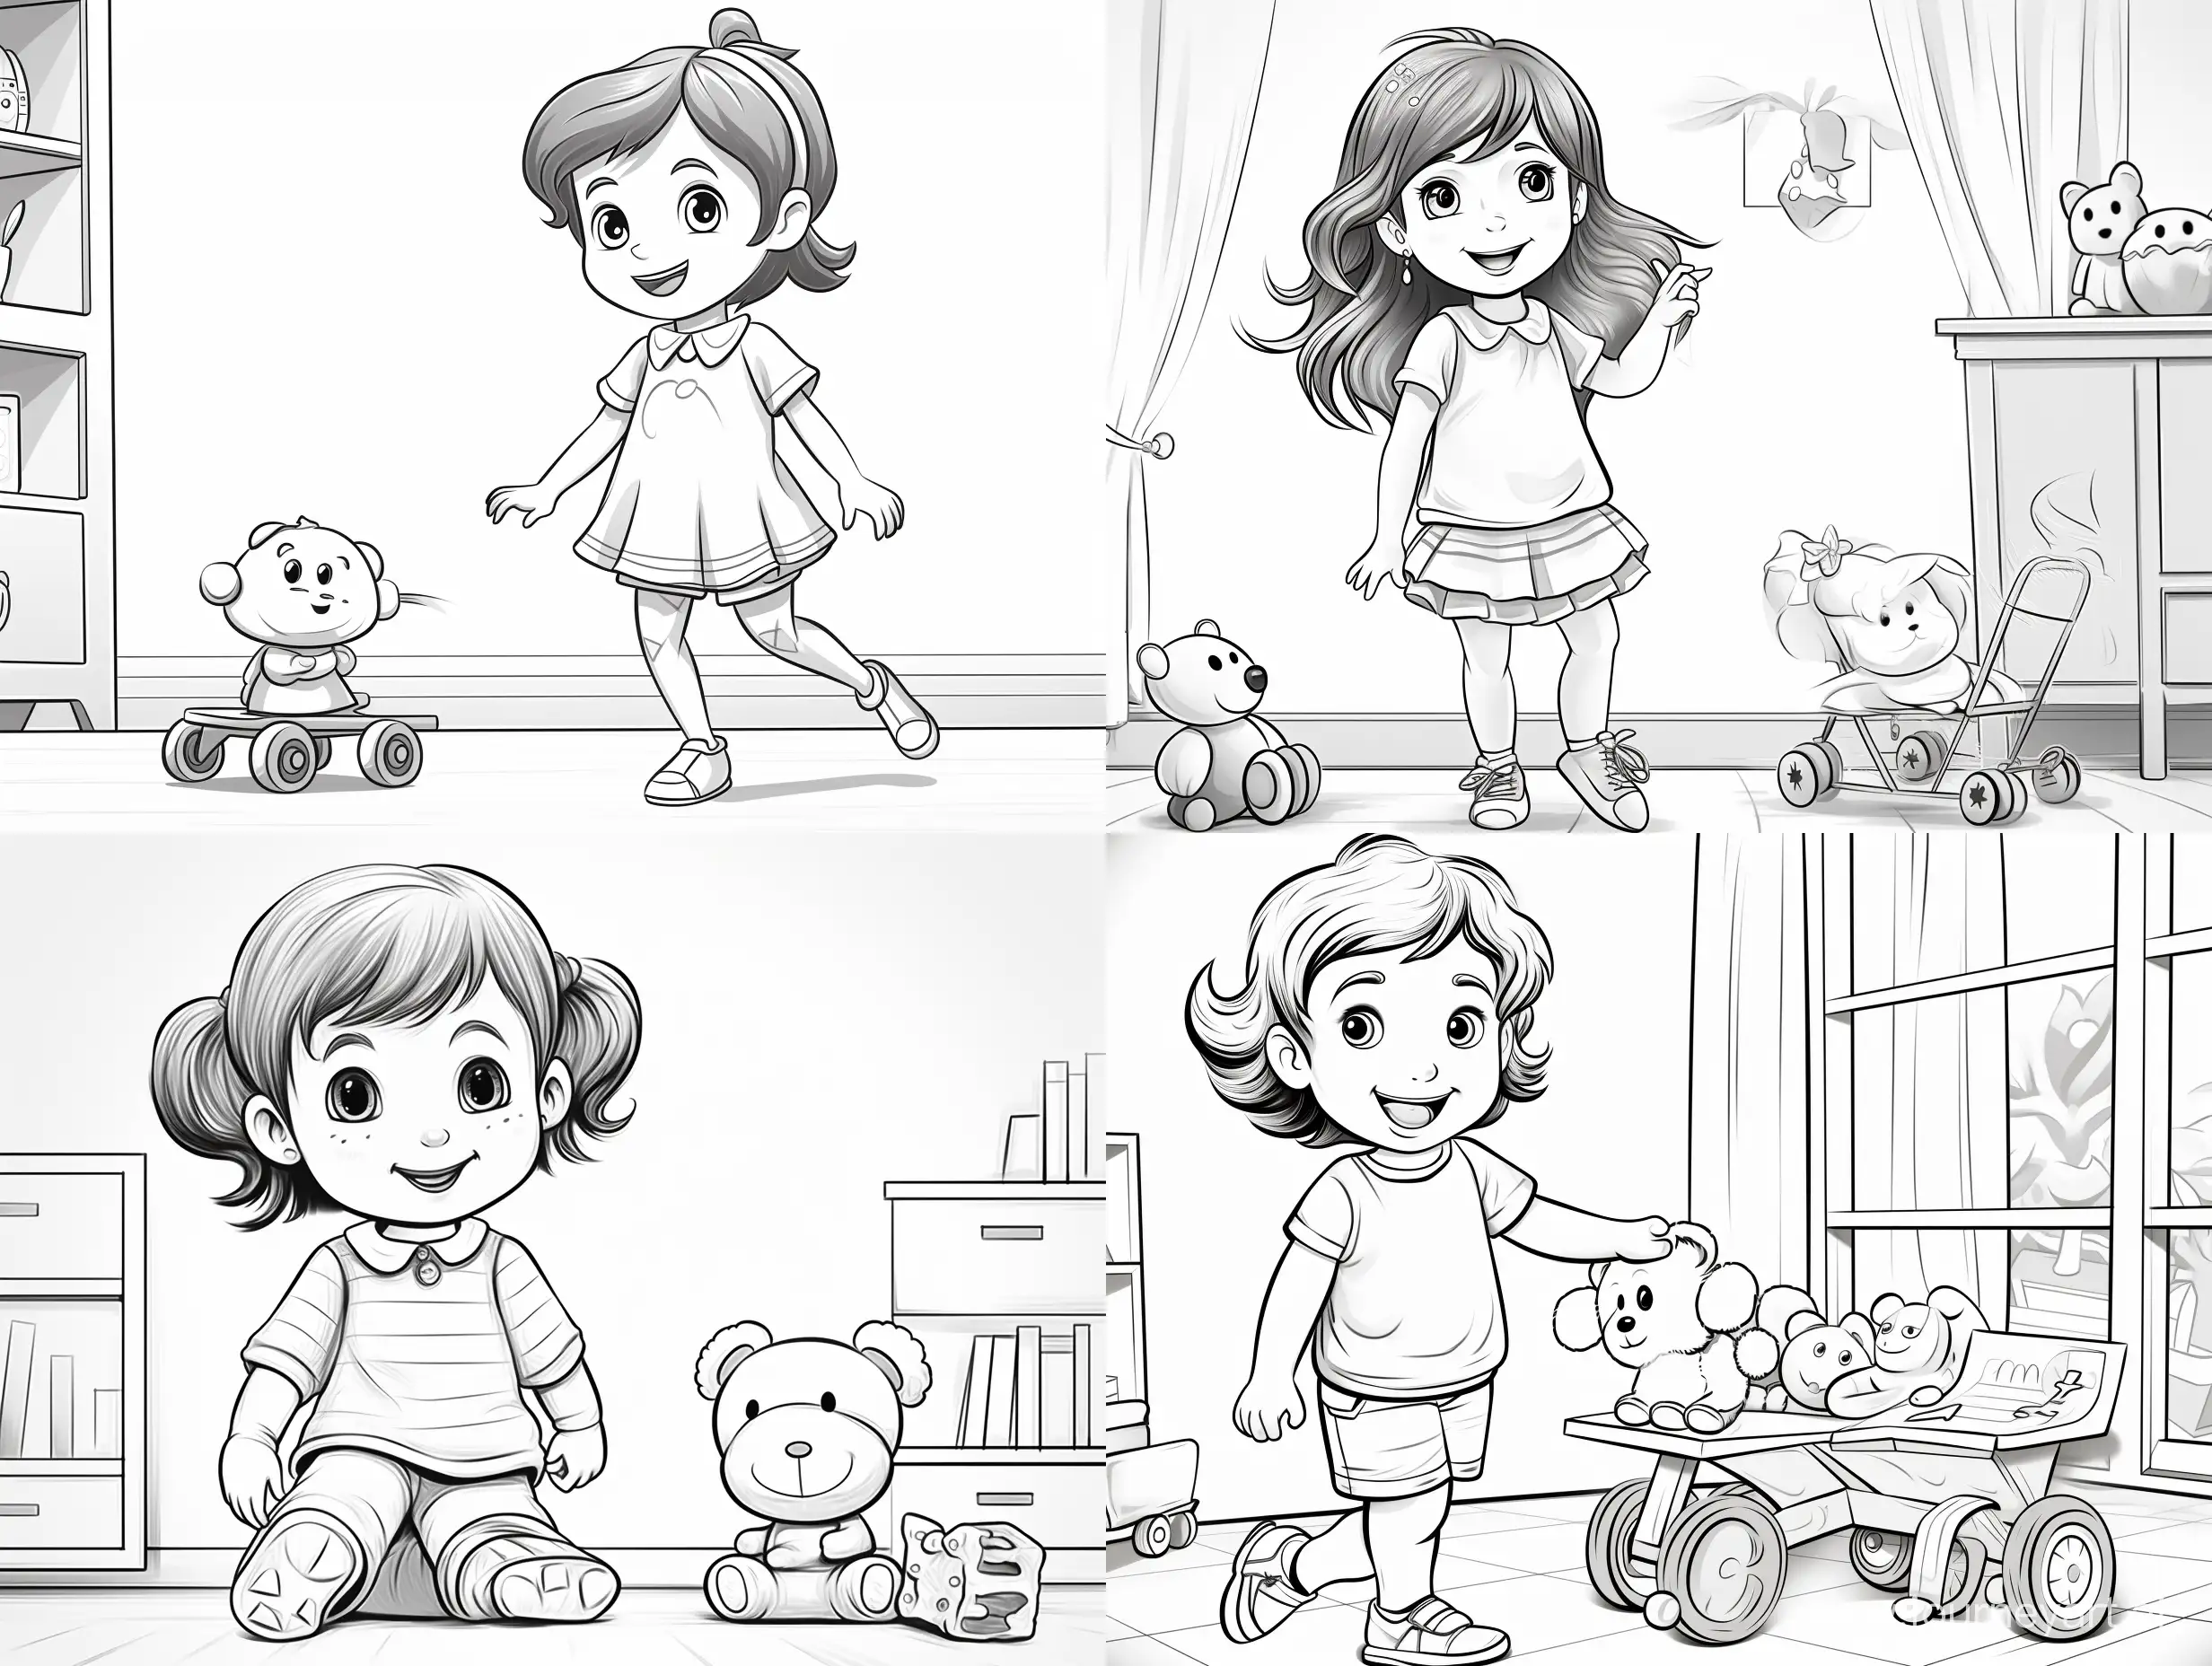 Joyful-Toddler-Coloring-Page-Adorable-AnimeStyle-Sketch-in-Kawaii-Black-and-White